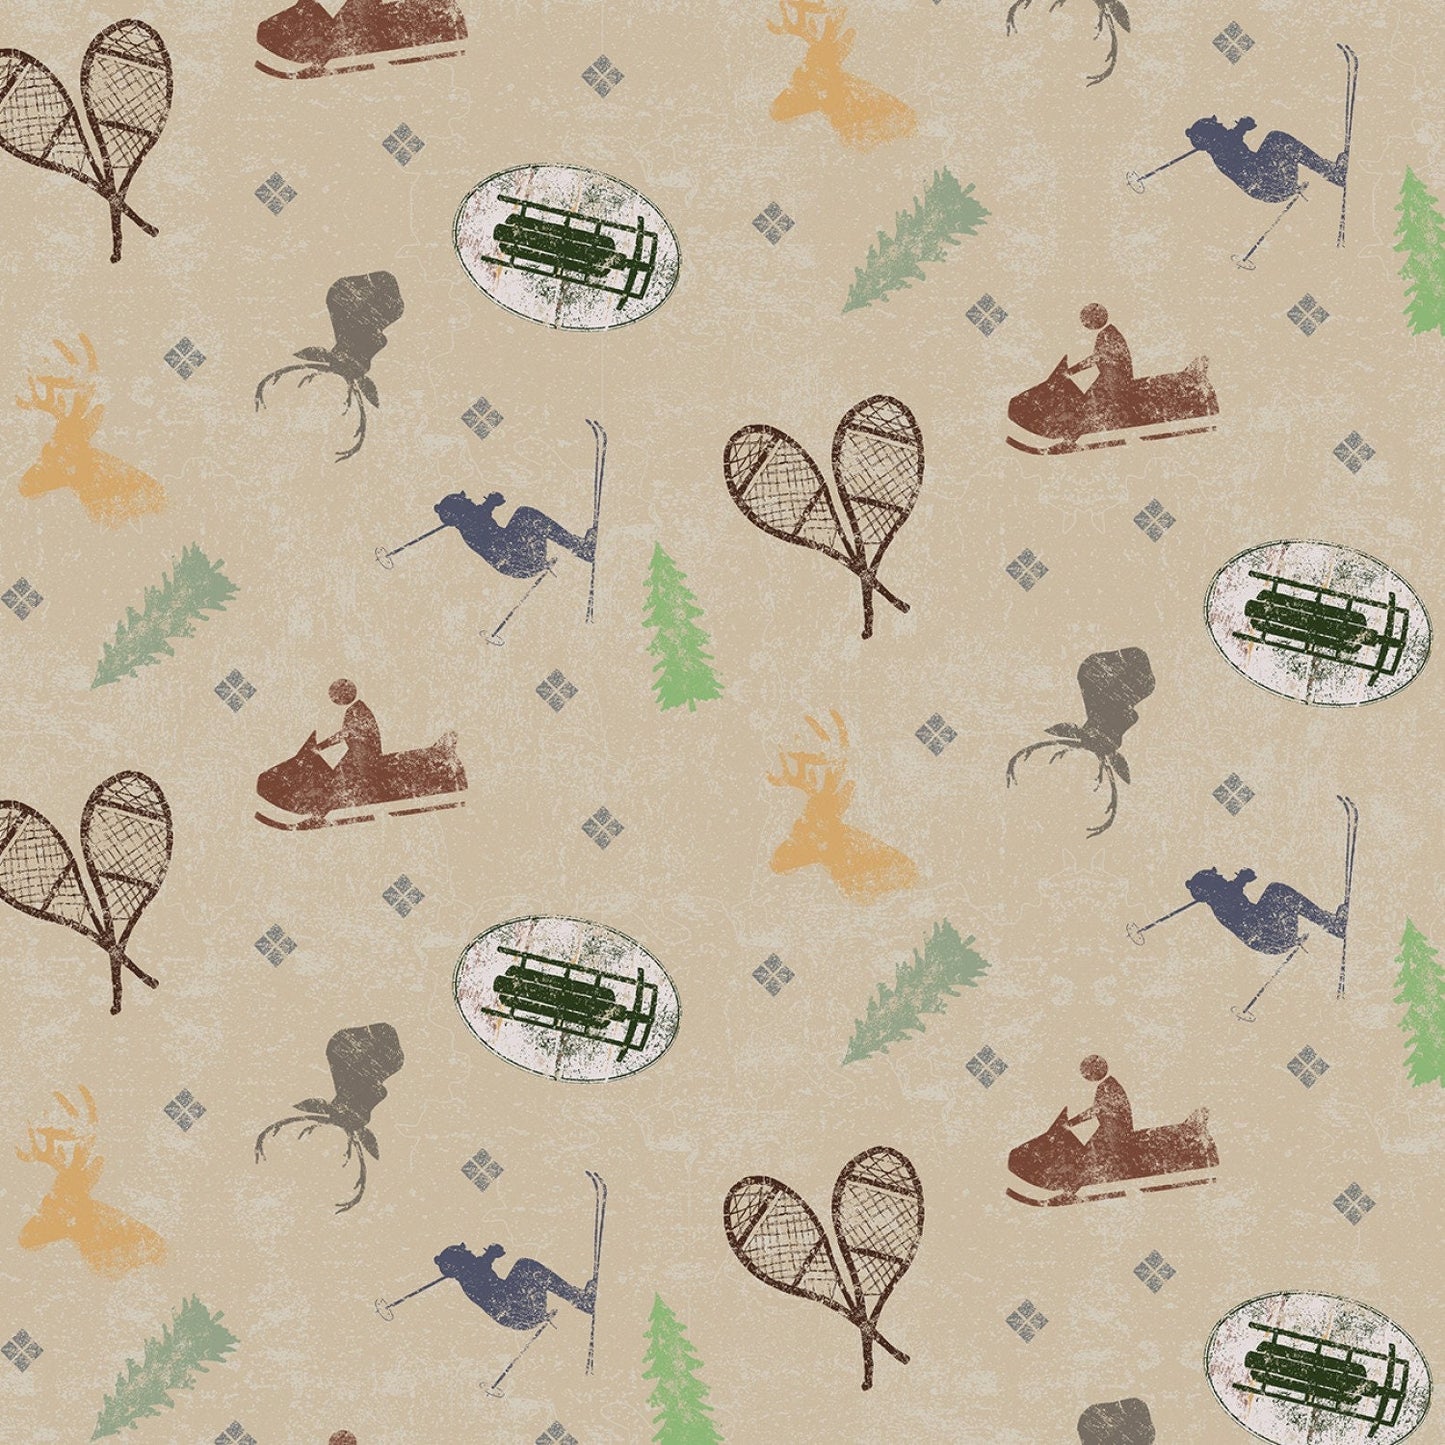 Winter Playground by Dan DiPaolo Khaki Winter Playground Equipment Y2766-12 Cotton Woven Fabric